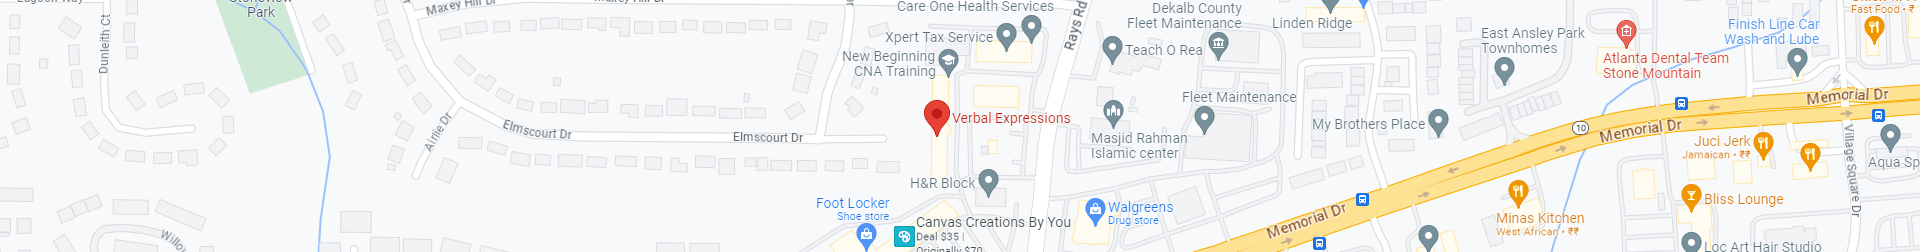 Verbal Expressions, Inc.